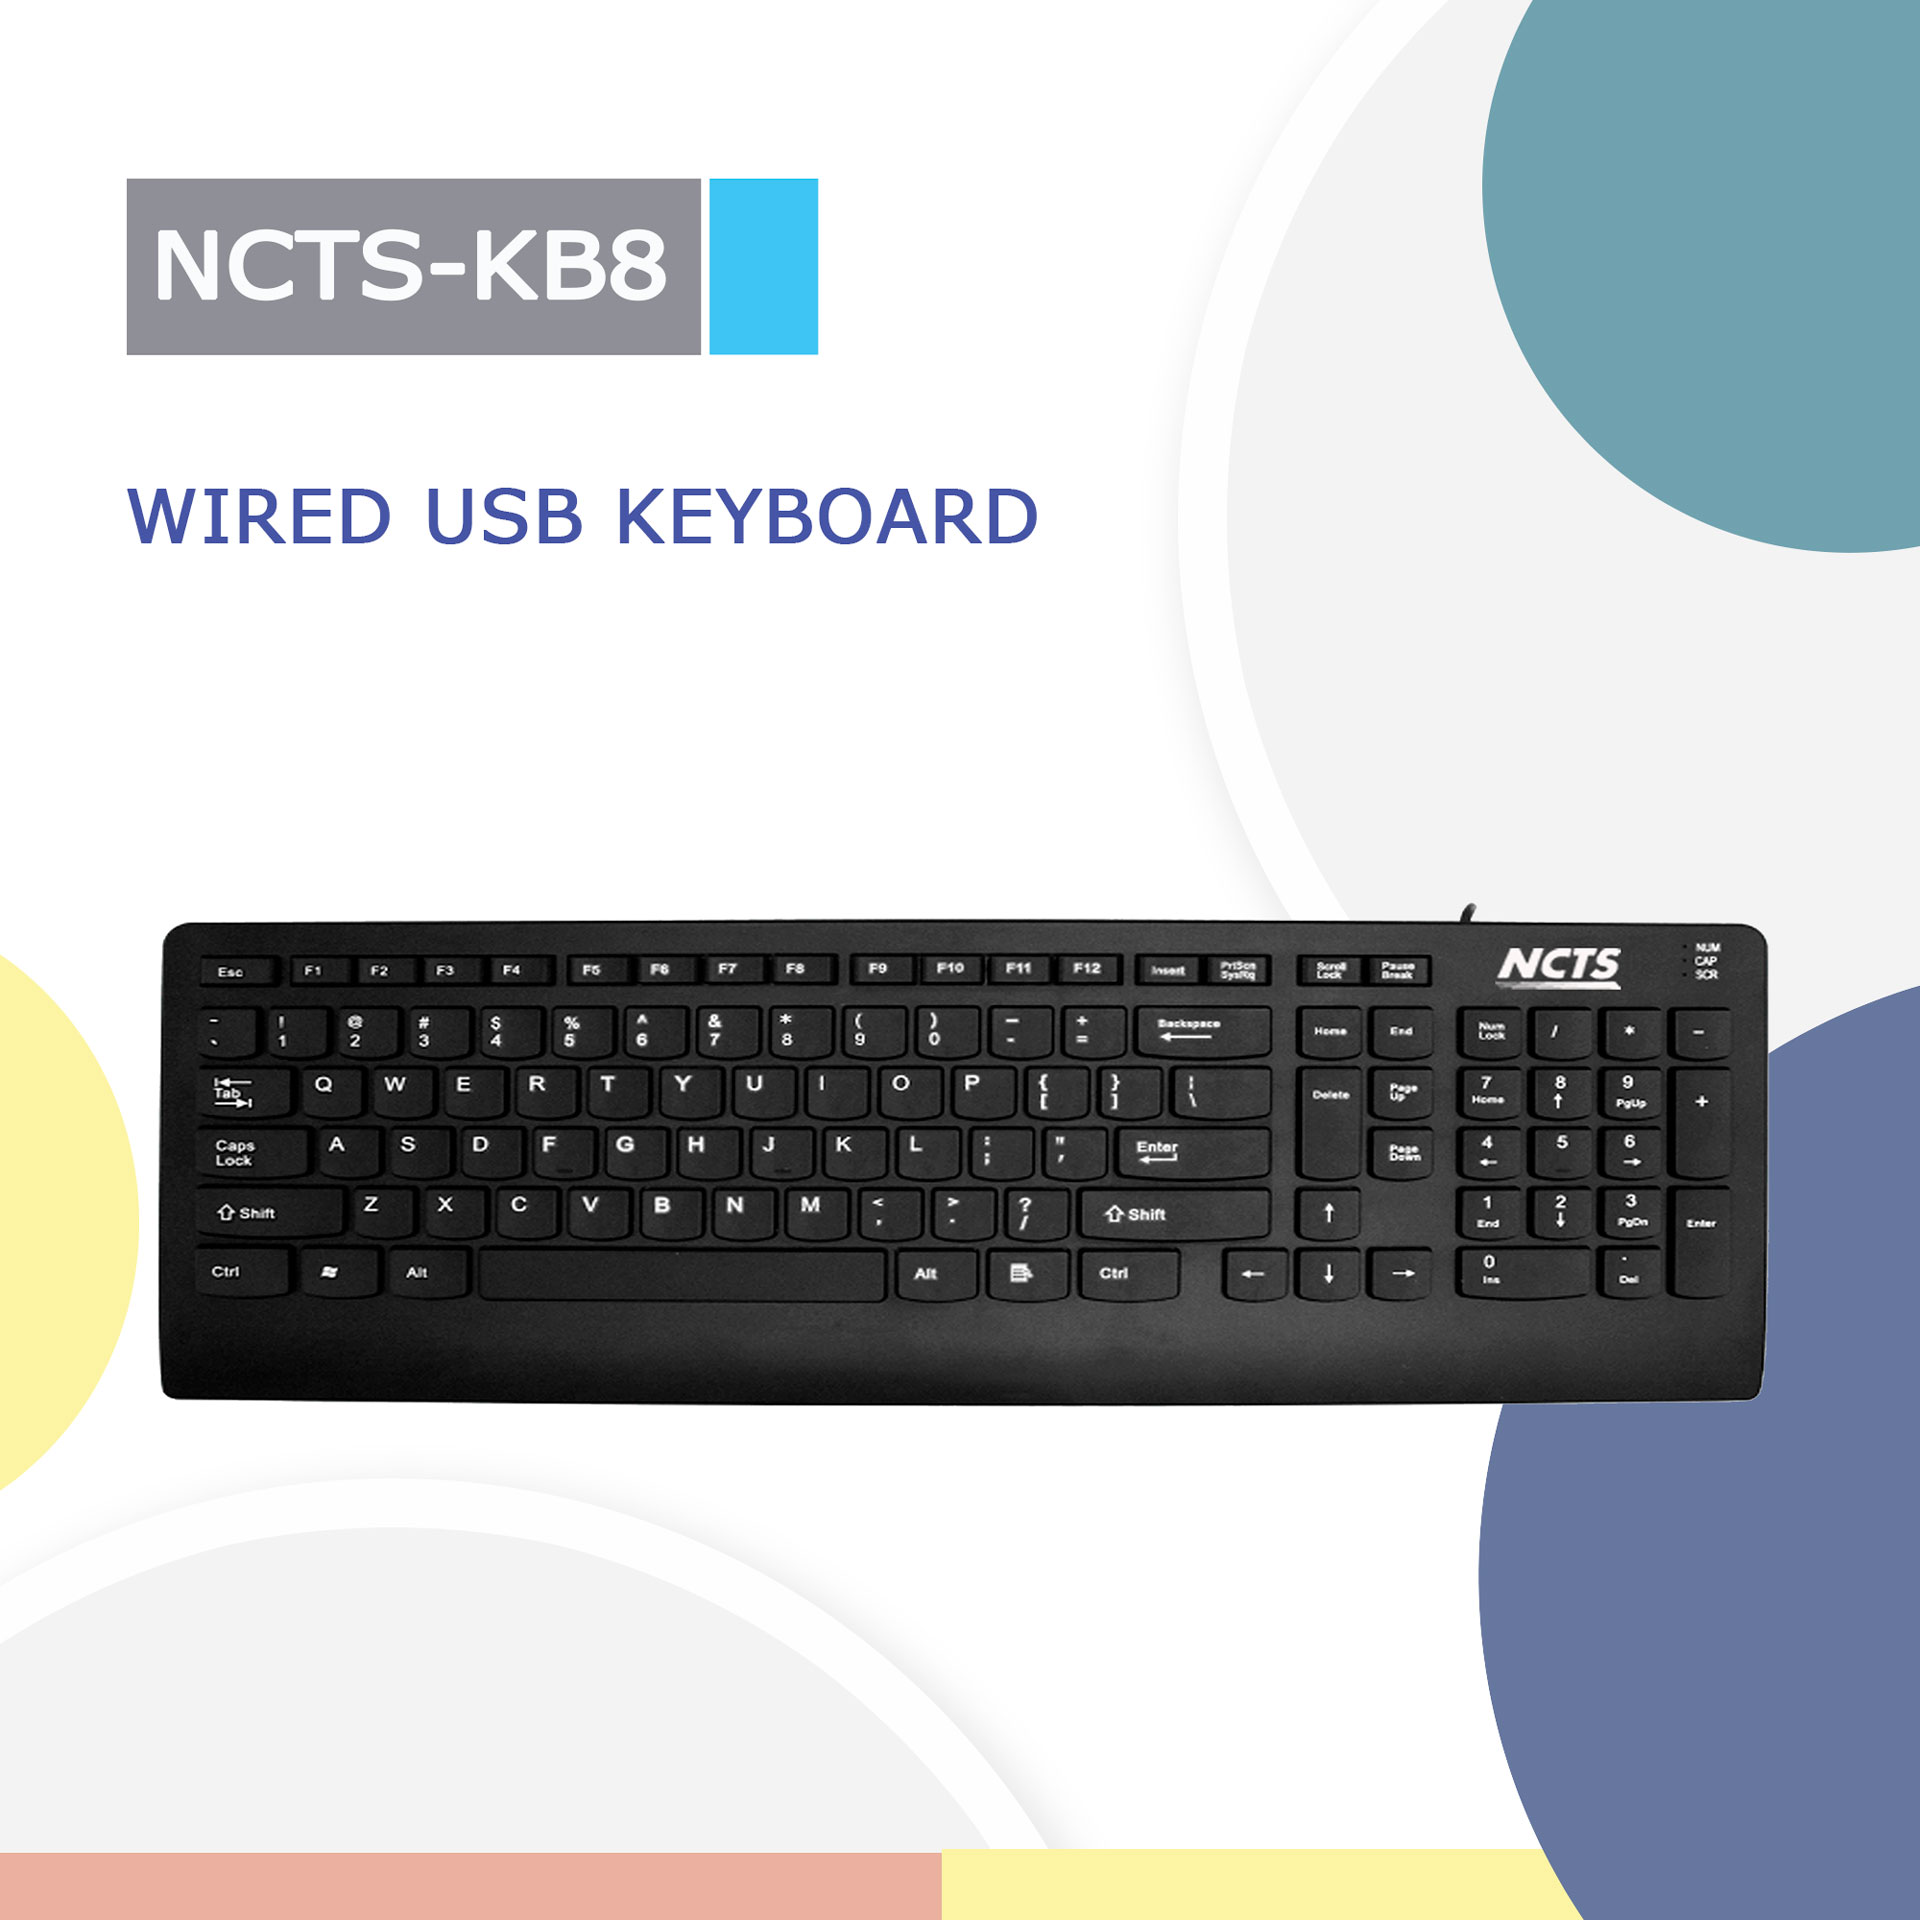 NCTS-KB8